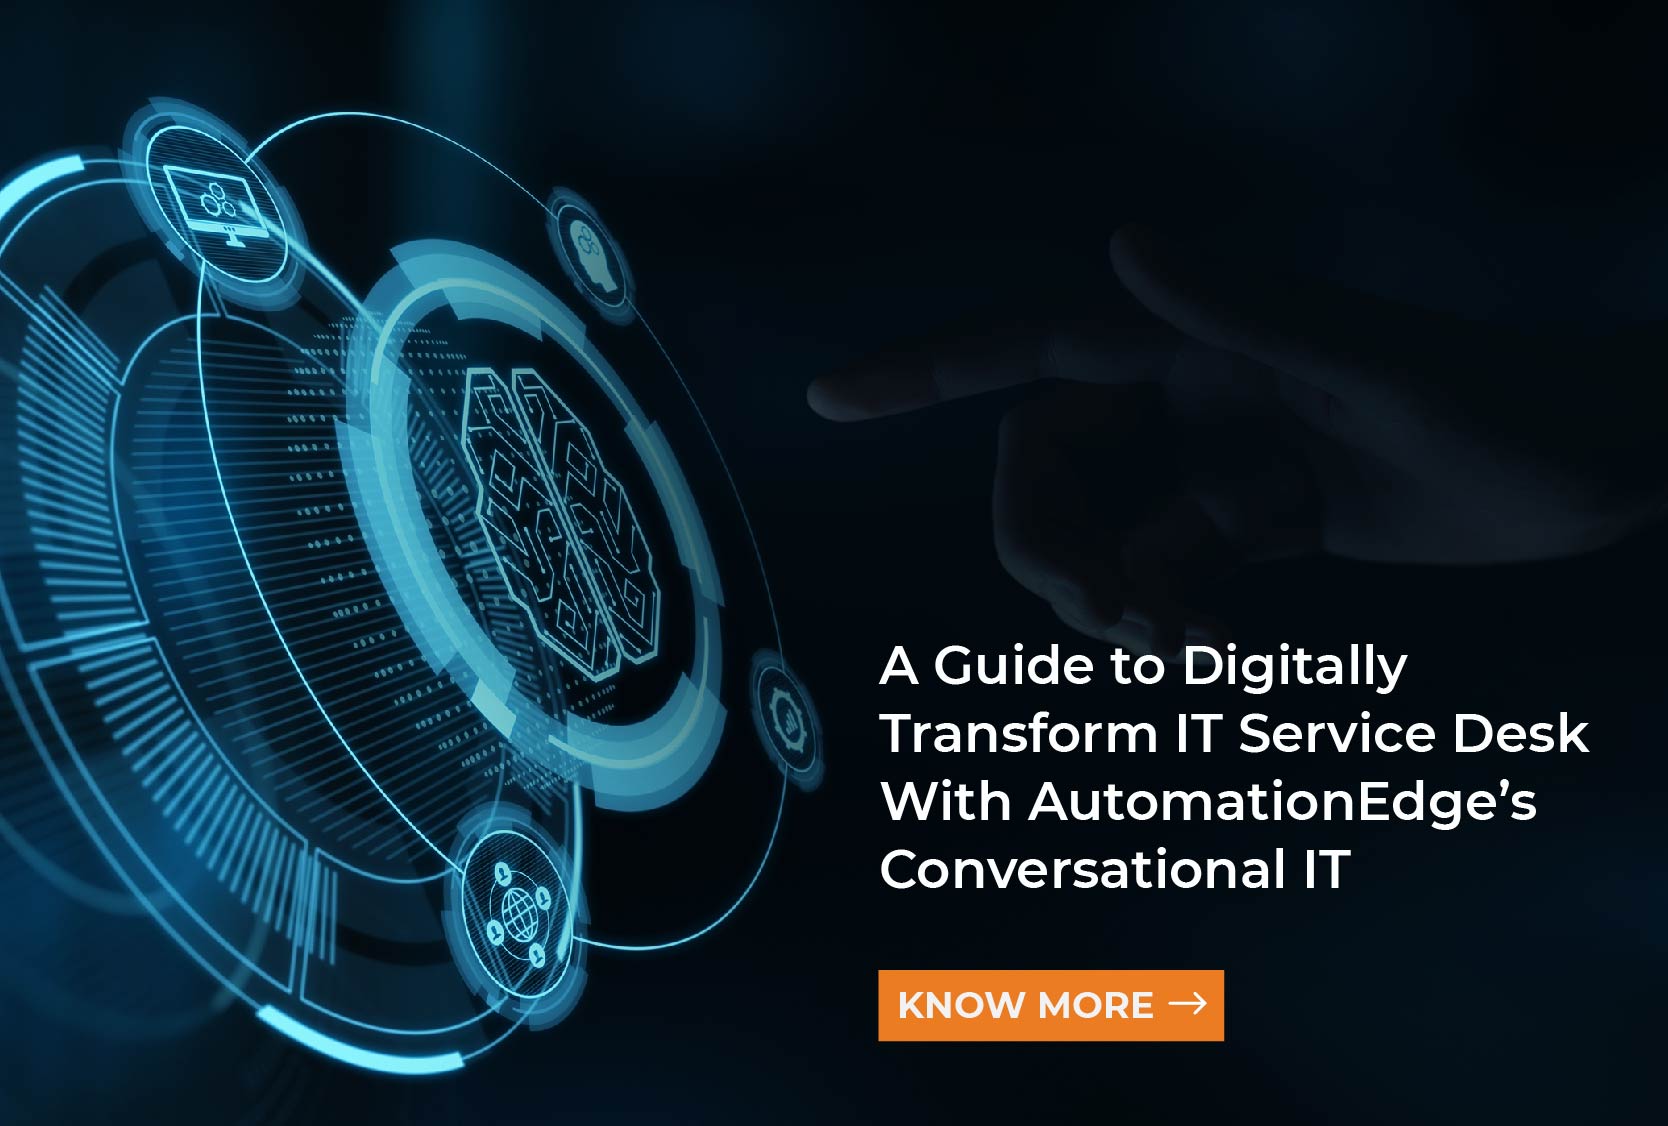 A Guide to Digitally Transform IT Service Desk With AutomationEdge Conversational IT